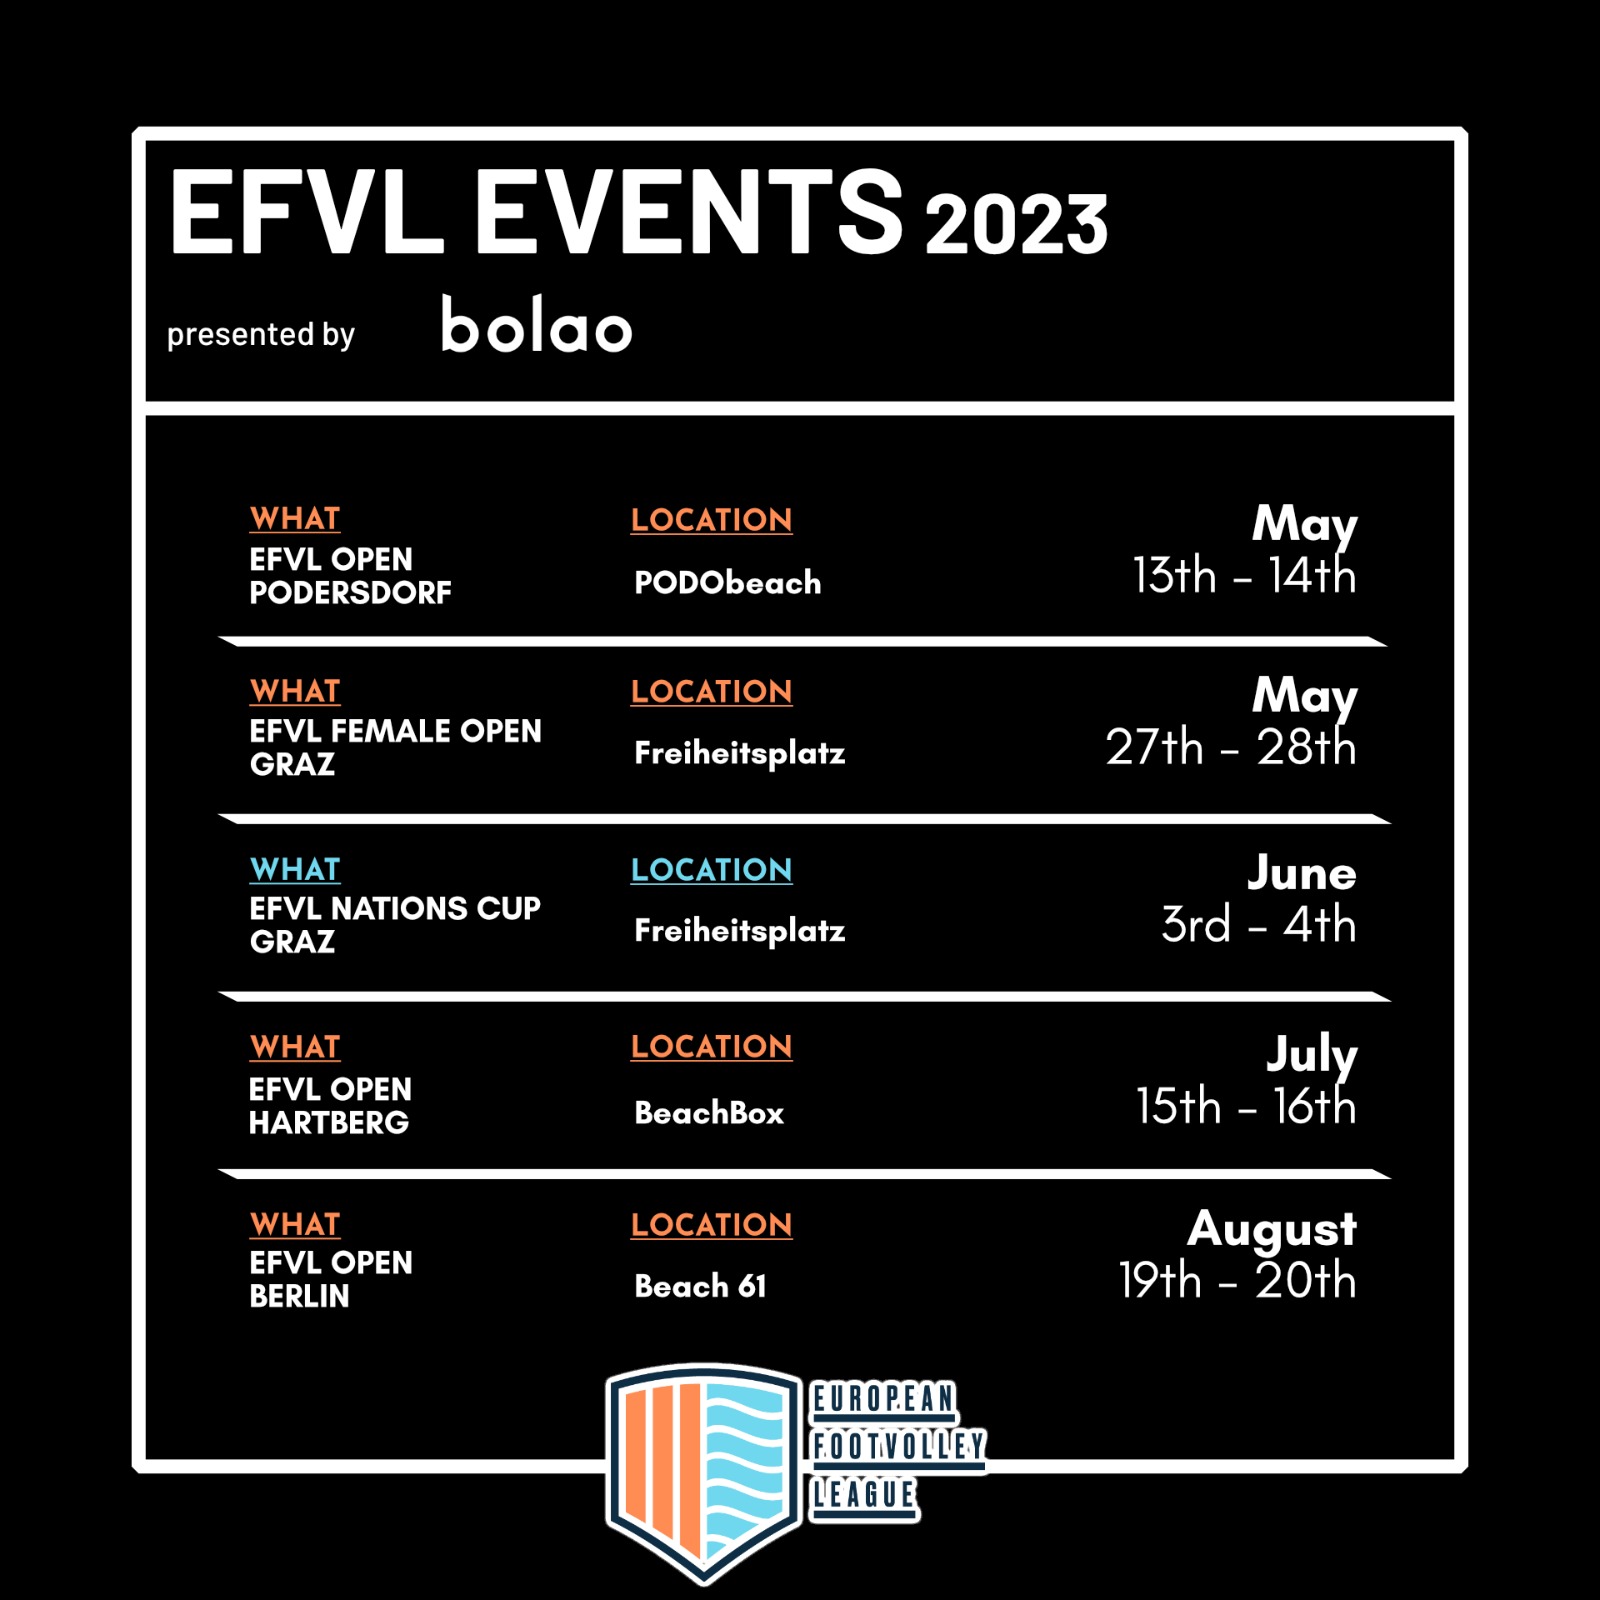 EVFL Events 2023 presented by bolao